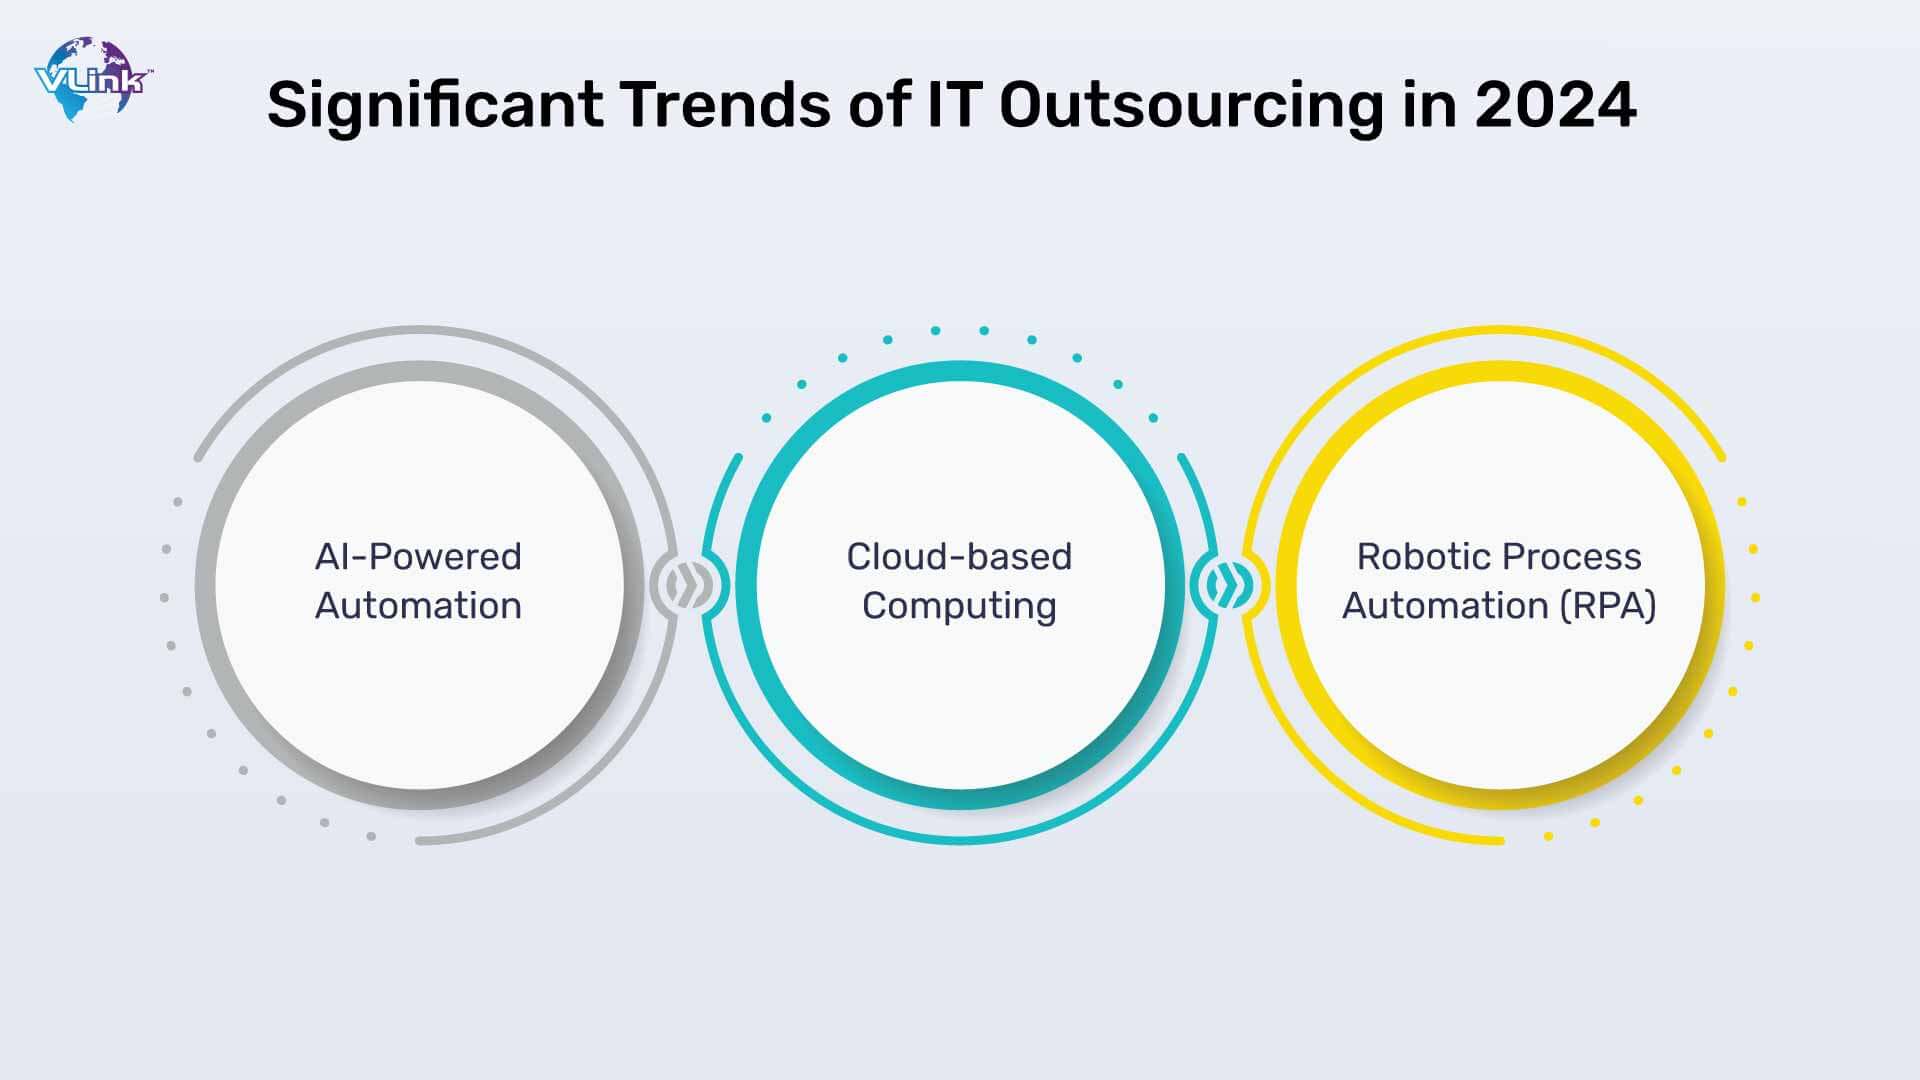 Significant Trends of IT Outsourcing in 2024